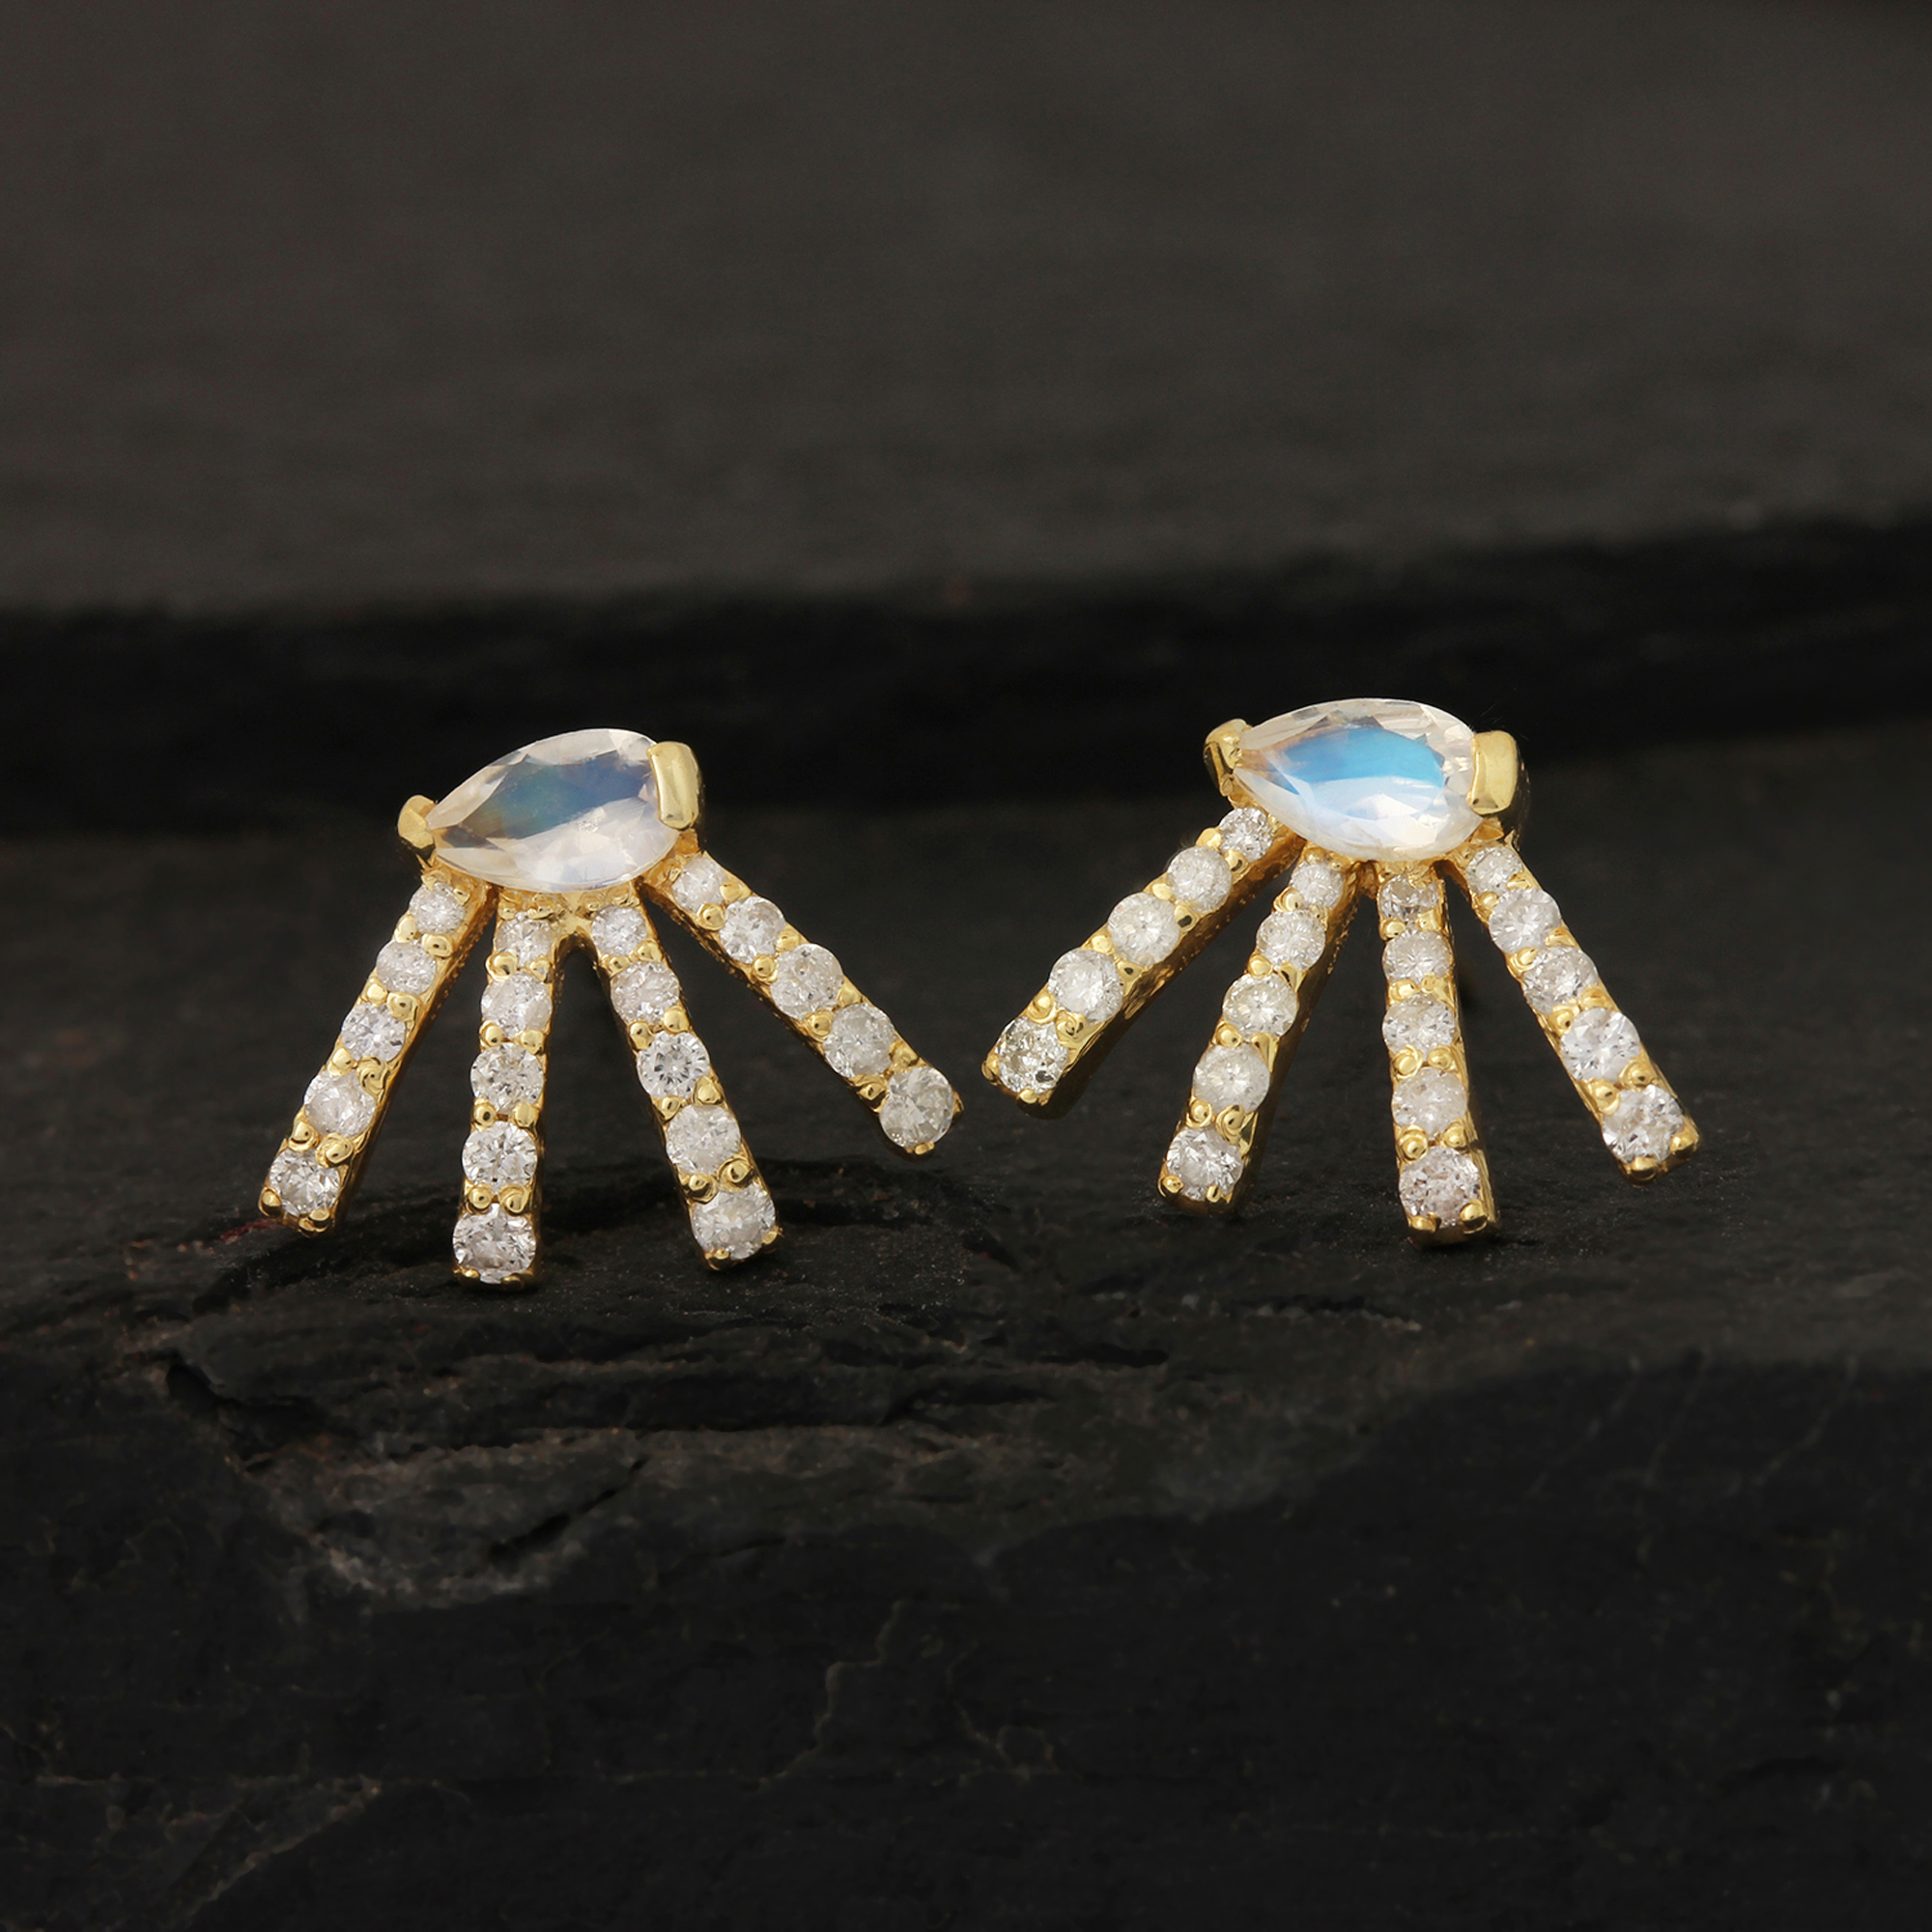 14k Gold Stud Earrings Studded With Natural Diamond & Moonstone